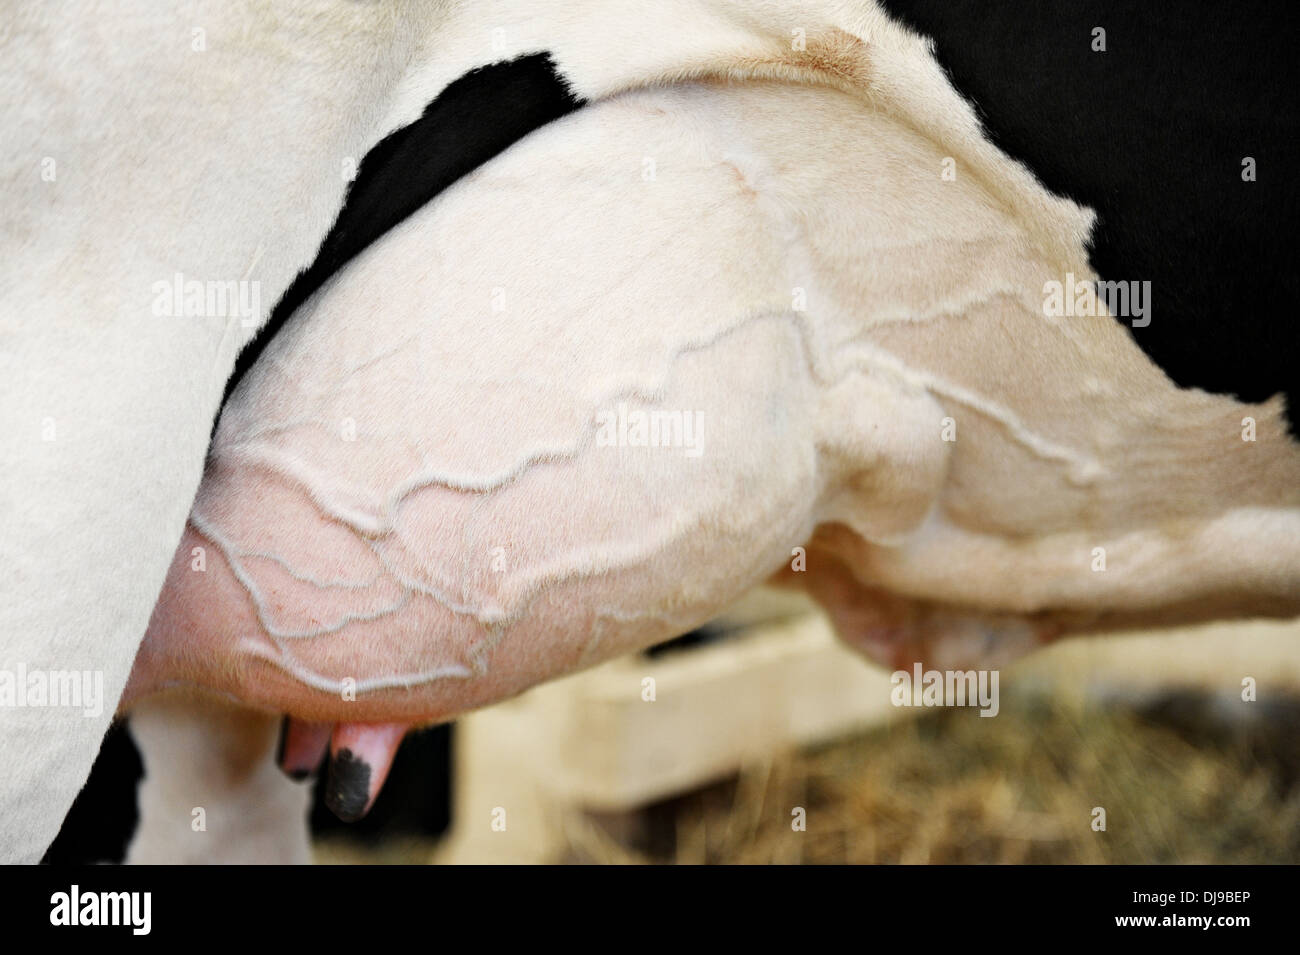 Detail with a full udder of a Holstein dairy cow Stock Photo